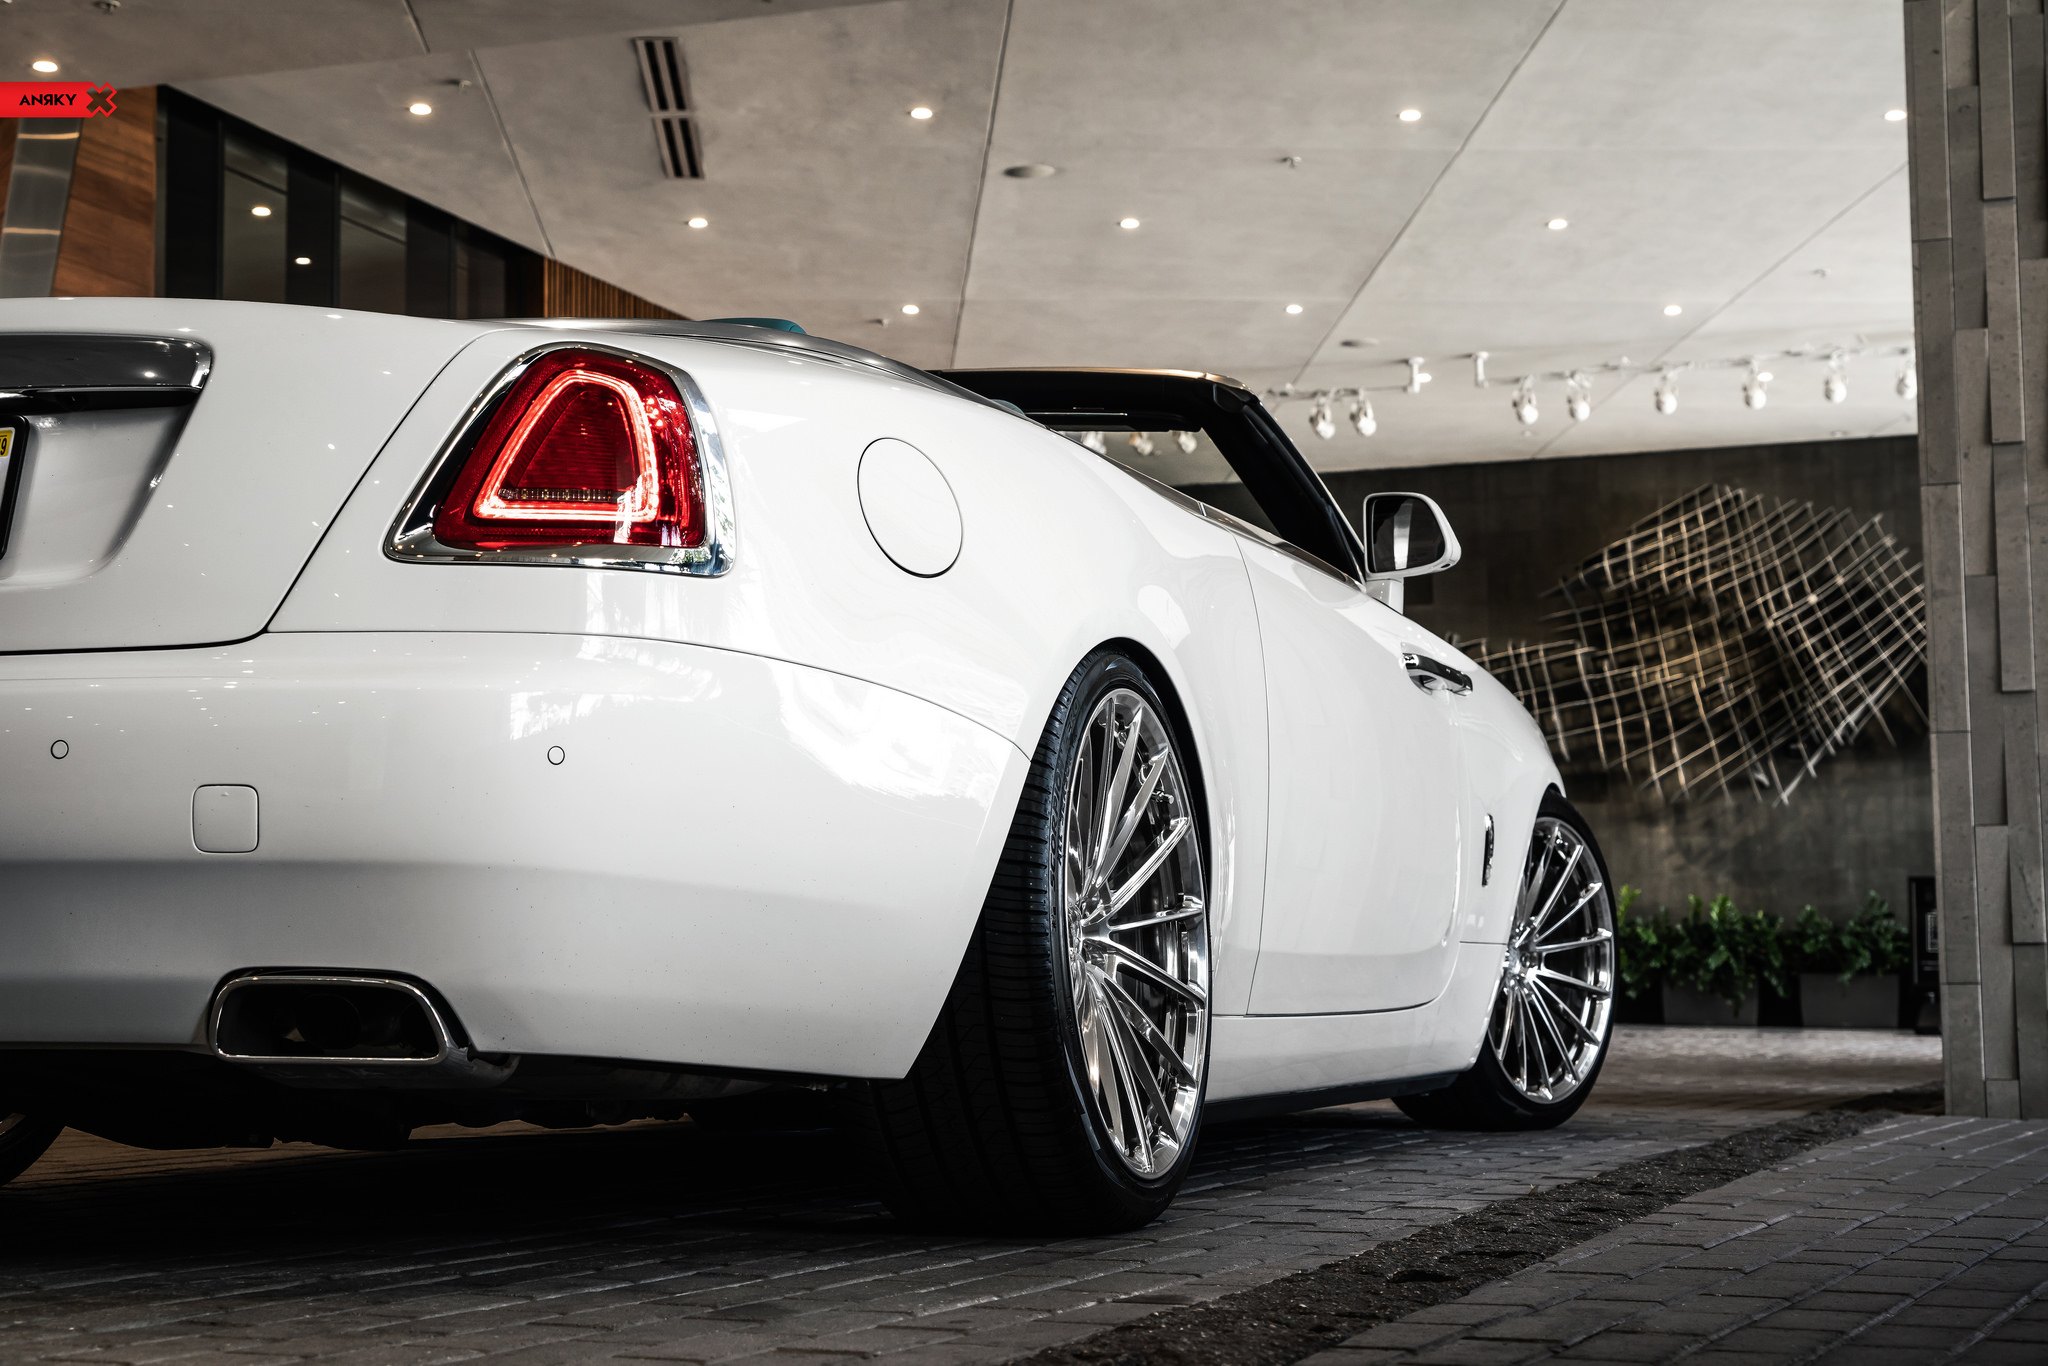 Red LED Taillights on White Rolls Royce Dawn - Photo by ANRKY Wheels